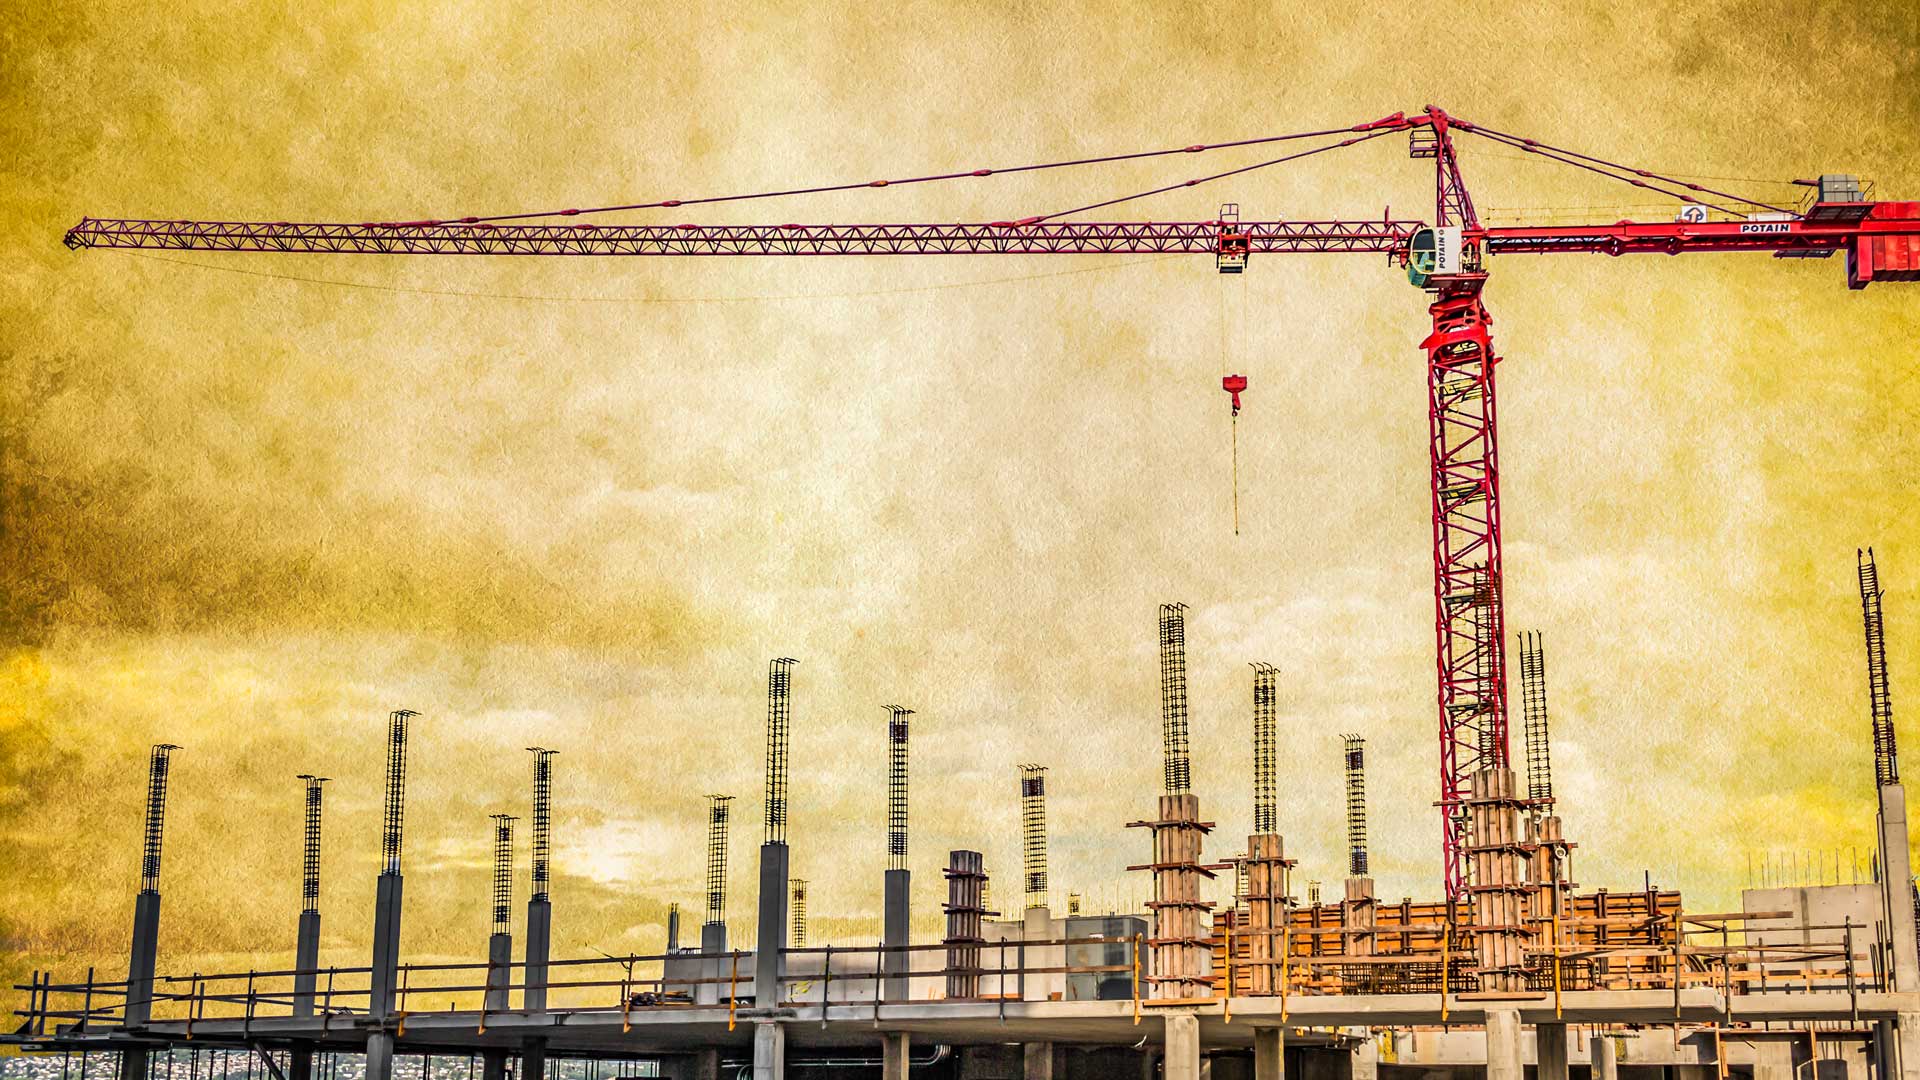 full view of a large construction crane over a construction site